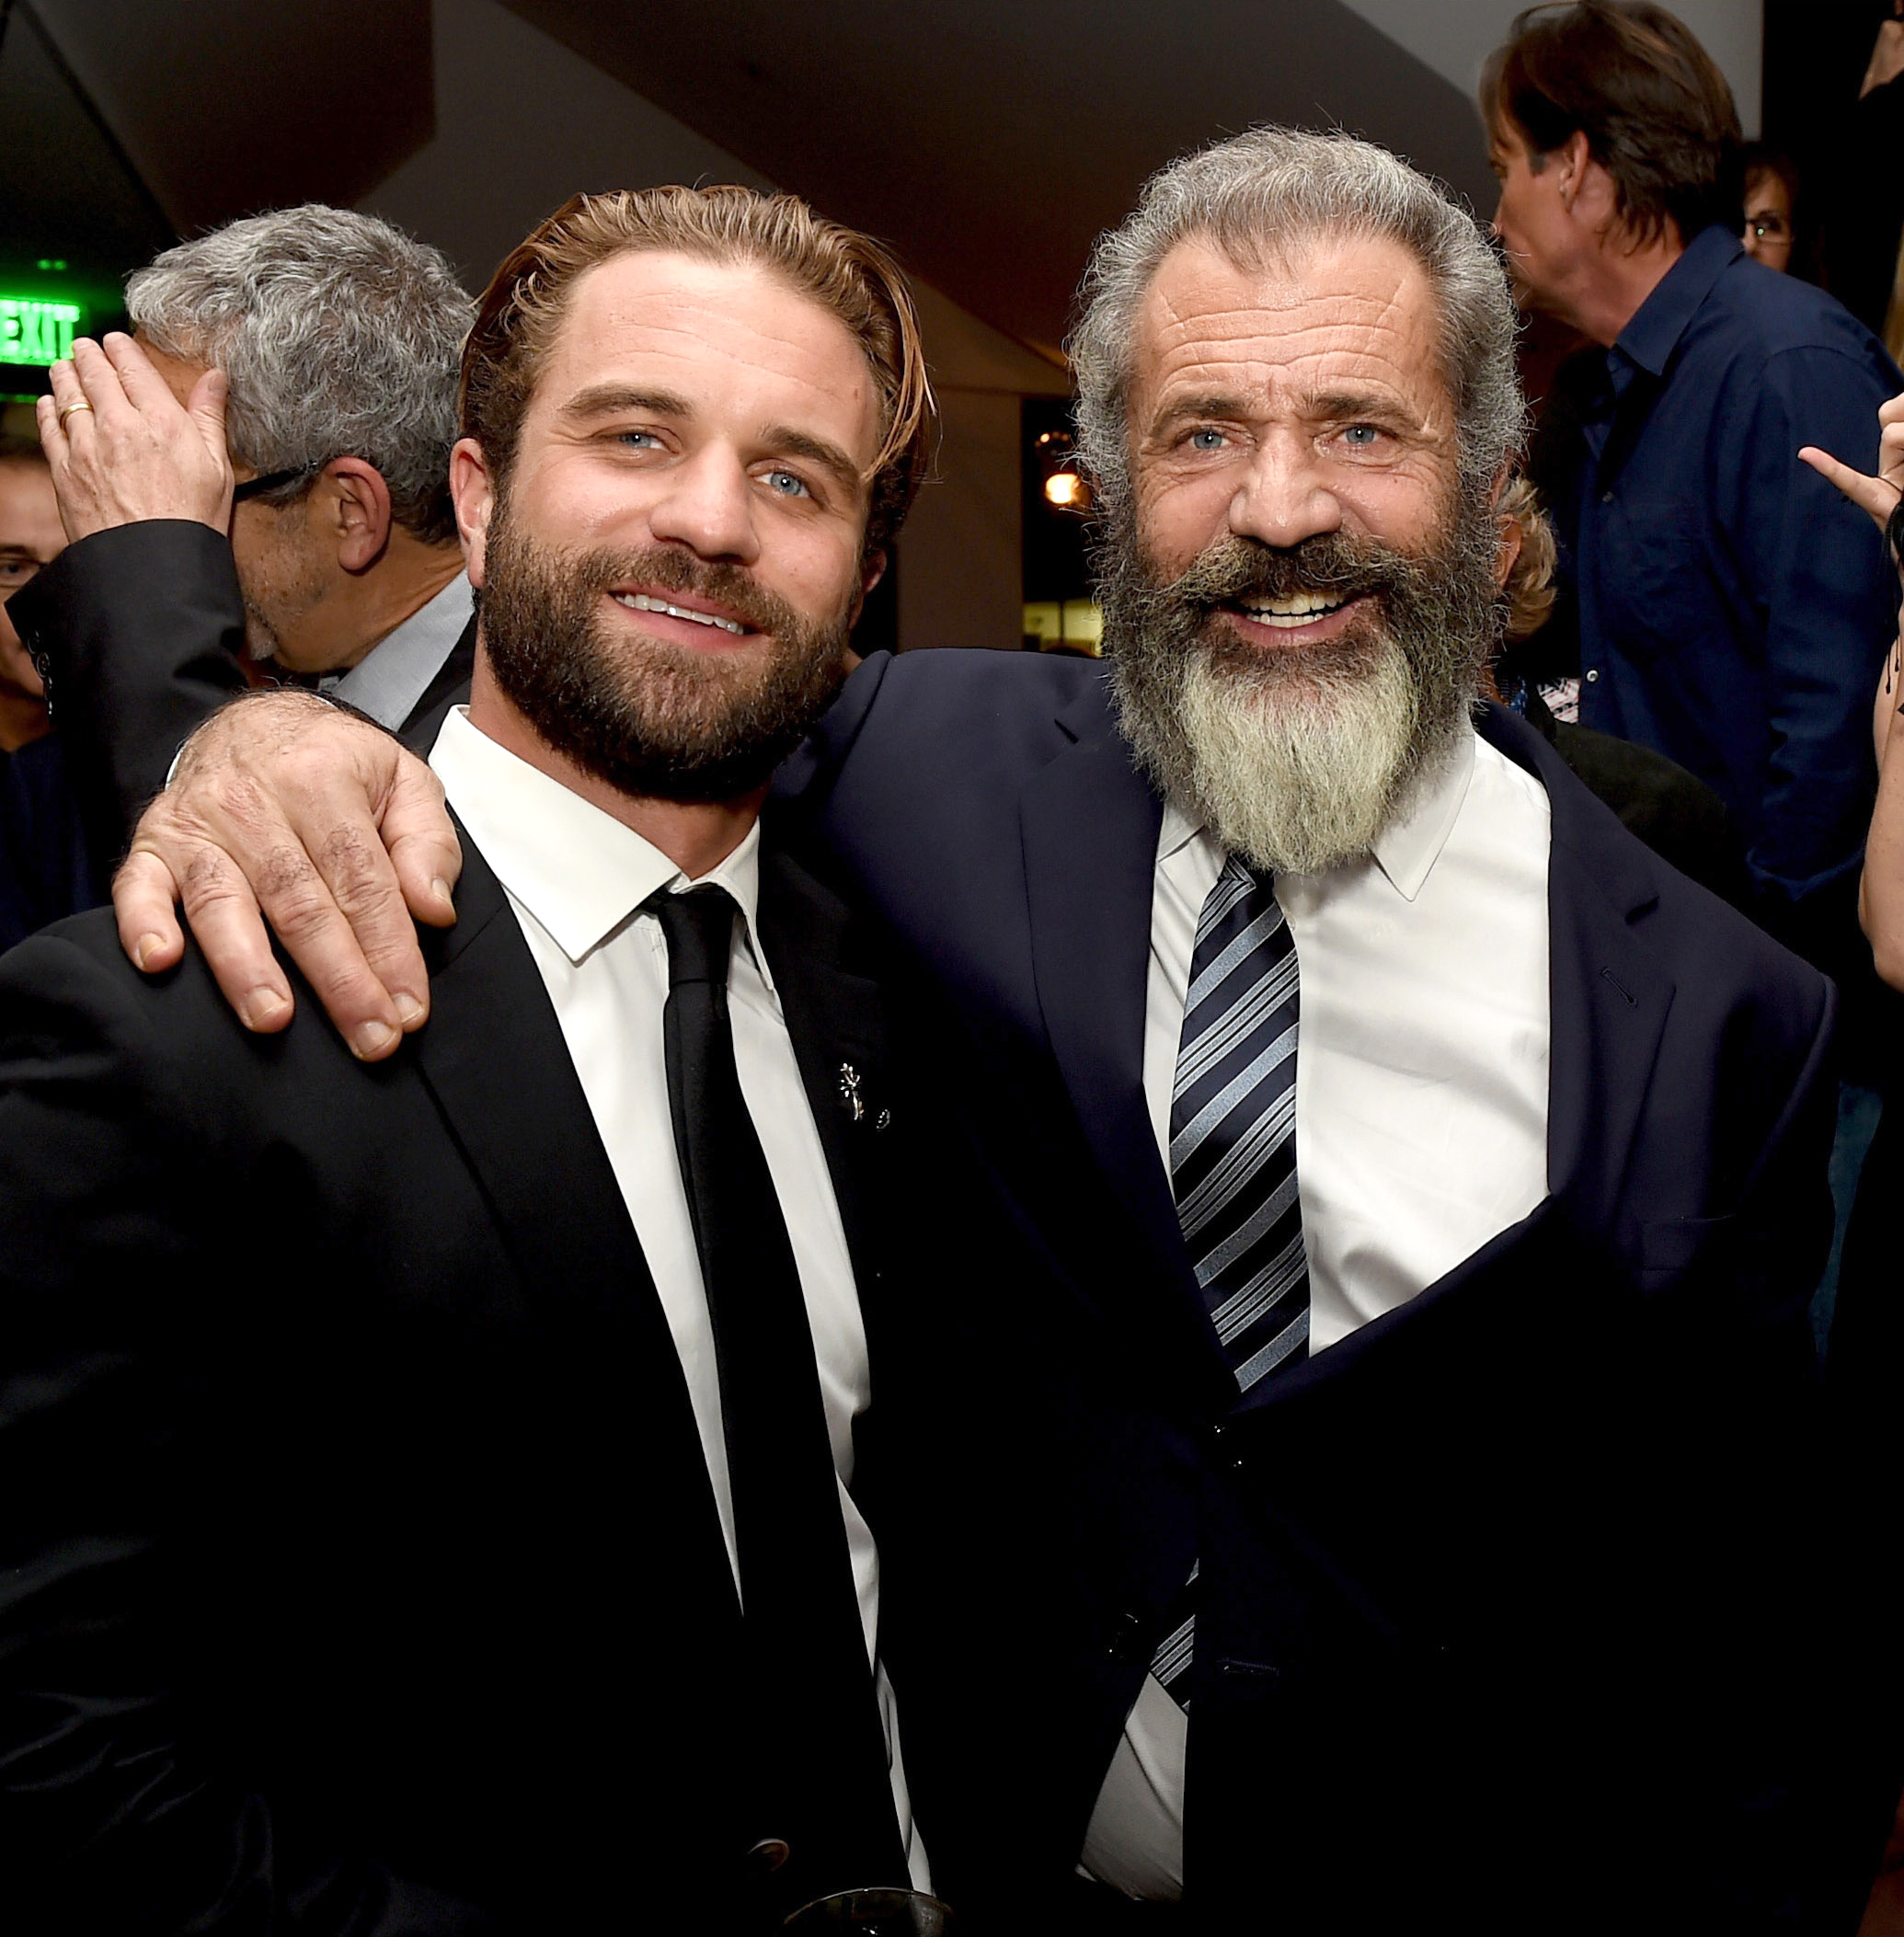 PHOTO: Mel Gibson and his son actor Milo Gibson, left, pose at the after party for a screening of Summit Entertainment's "Hacksaw Ridge" at the Academy of Motion Picture Arts and Sciences, Oct. 24, 2016, in Beverly Hills, California.